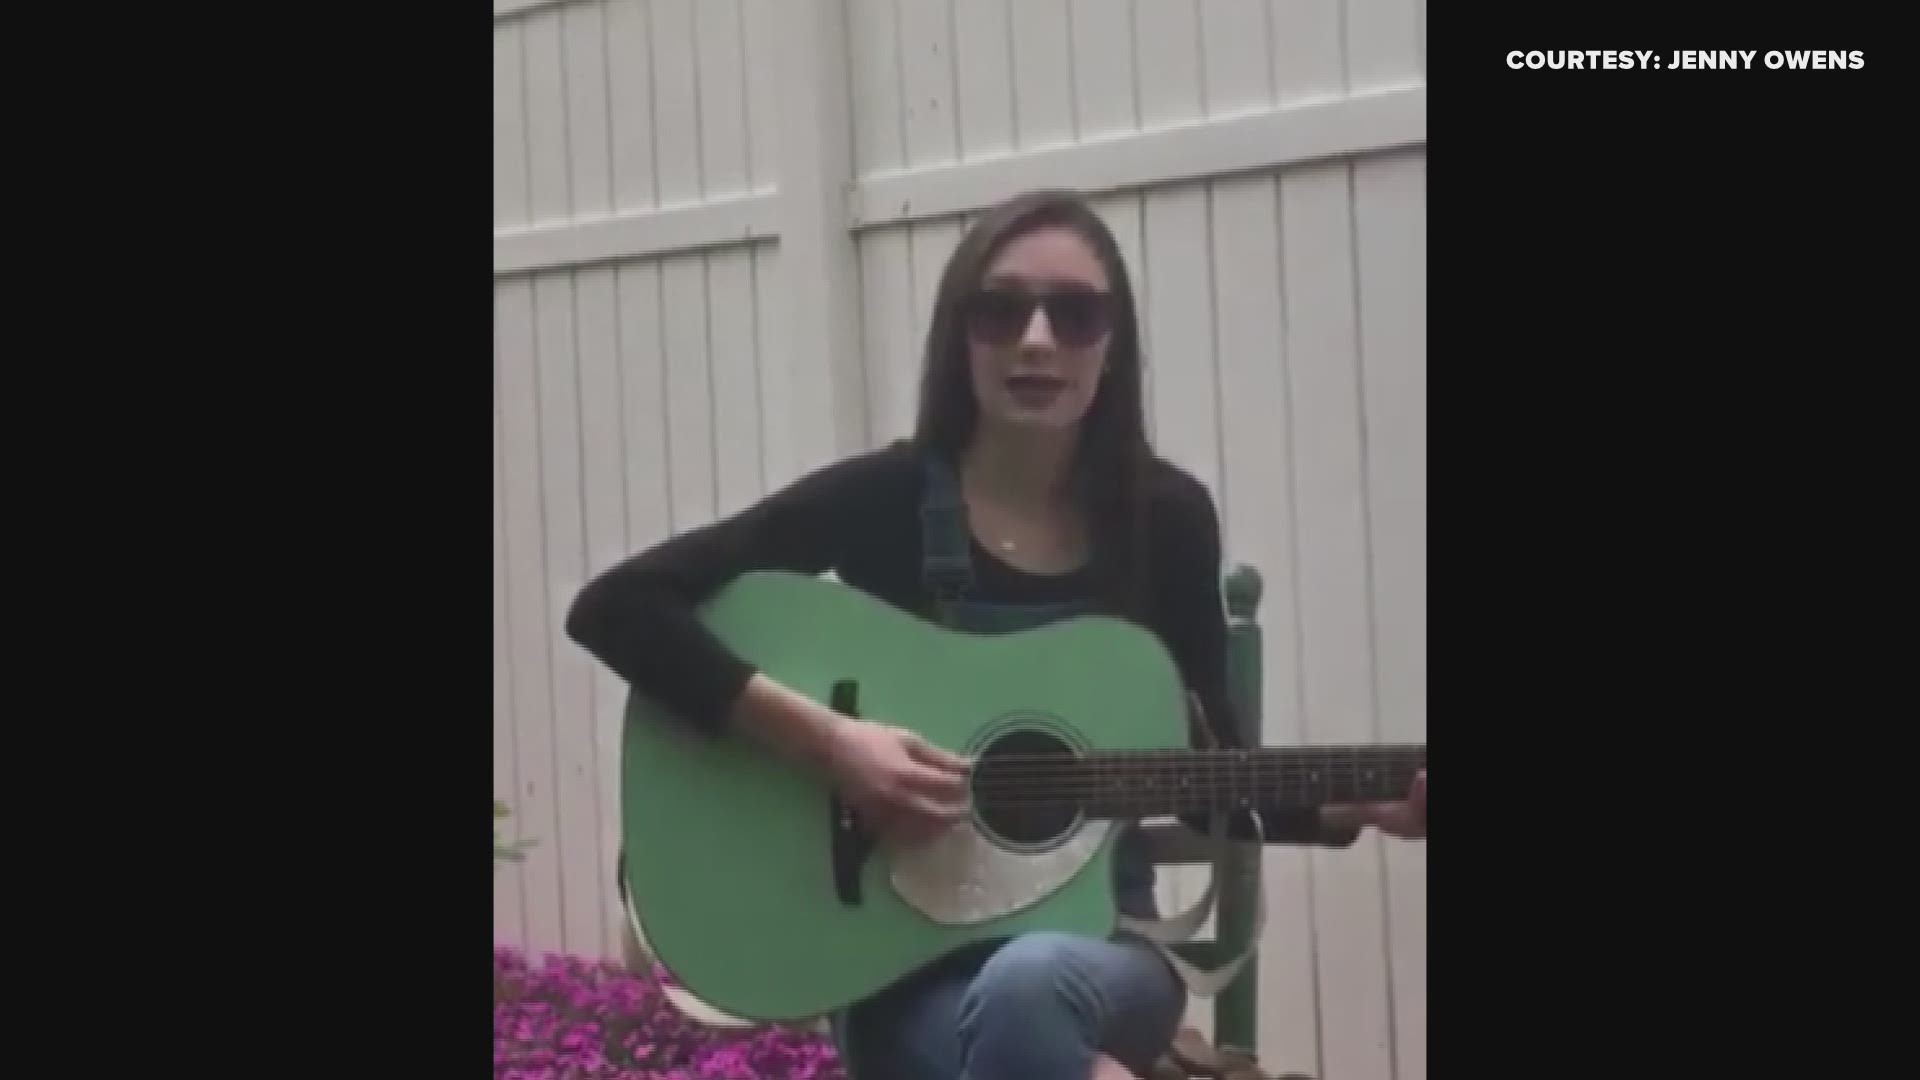 Take a listen to Caroline Owens' "Pollen" song, performed to the tune of Dolly Parton's "Jolene." If you have allergies, this is your anthem.